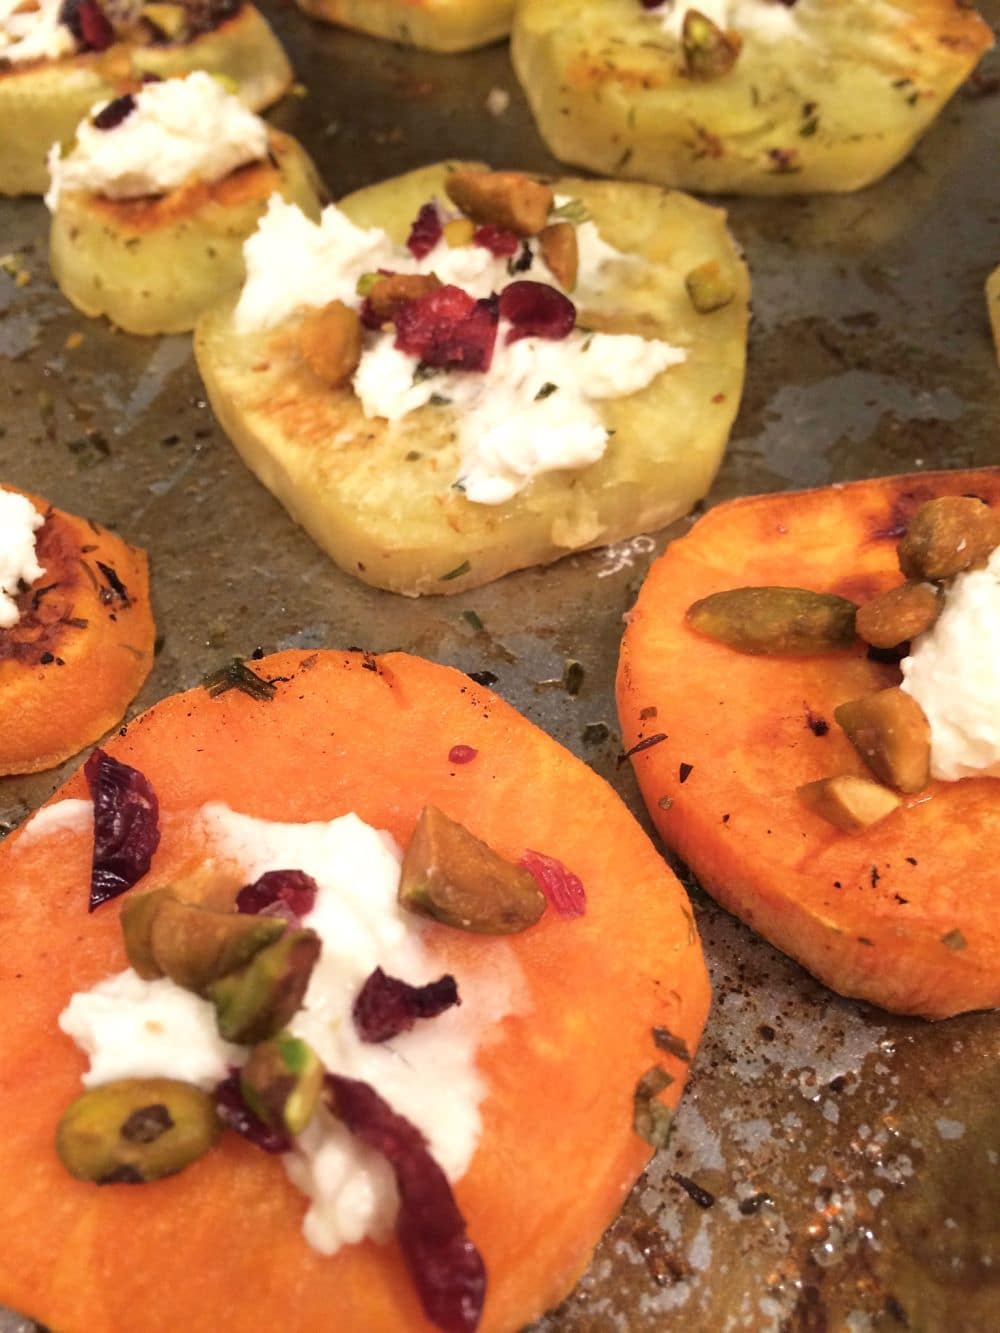 Need an appetizer that is truly the easiest thing ever and tastes like you put a lot of effort into it? These Sweet Potato Starter Bites fit the bill. They are easy to make, can be put together in about a half an hour (which includes 20 minutes of baking time) and are really versatile.